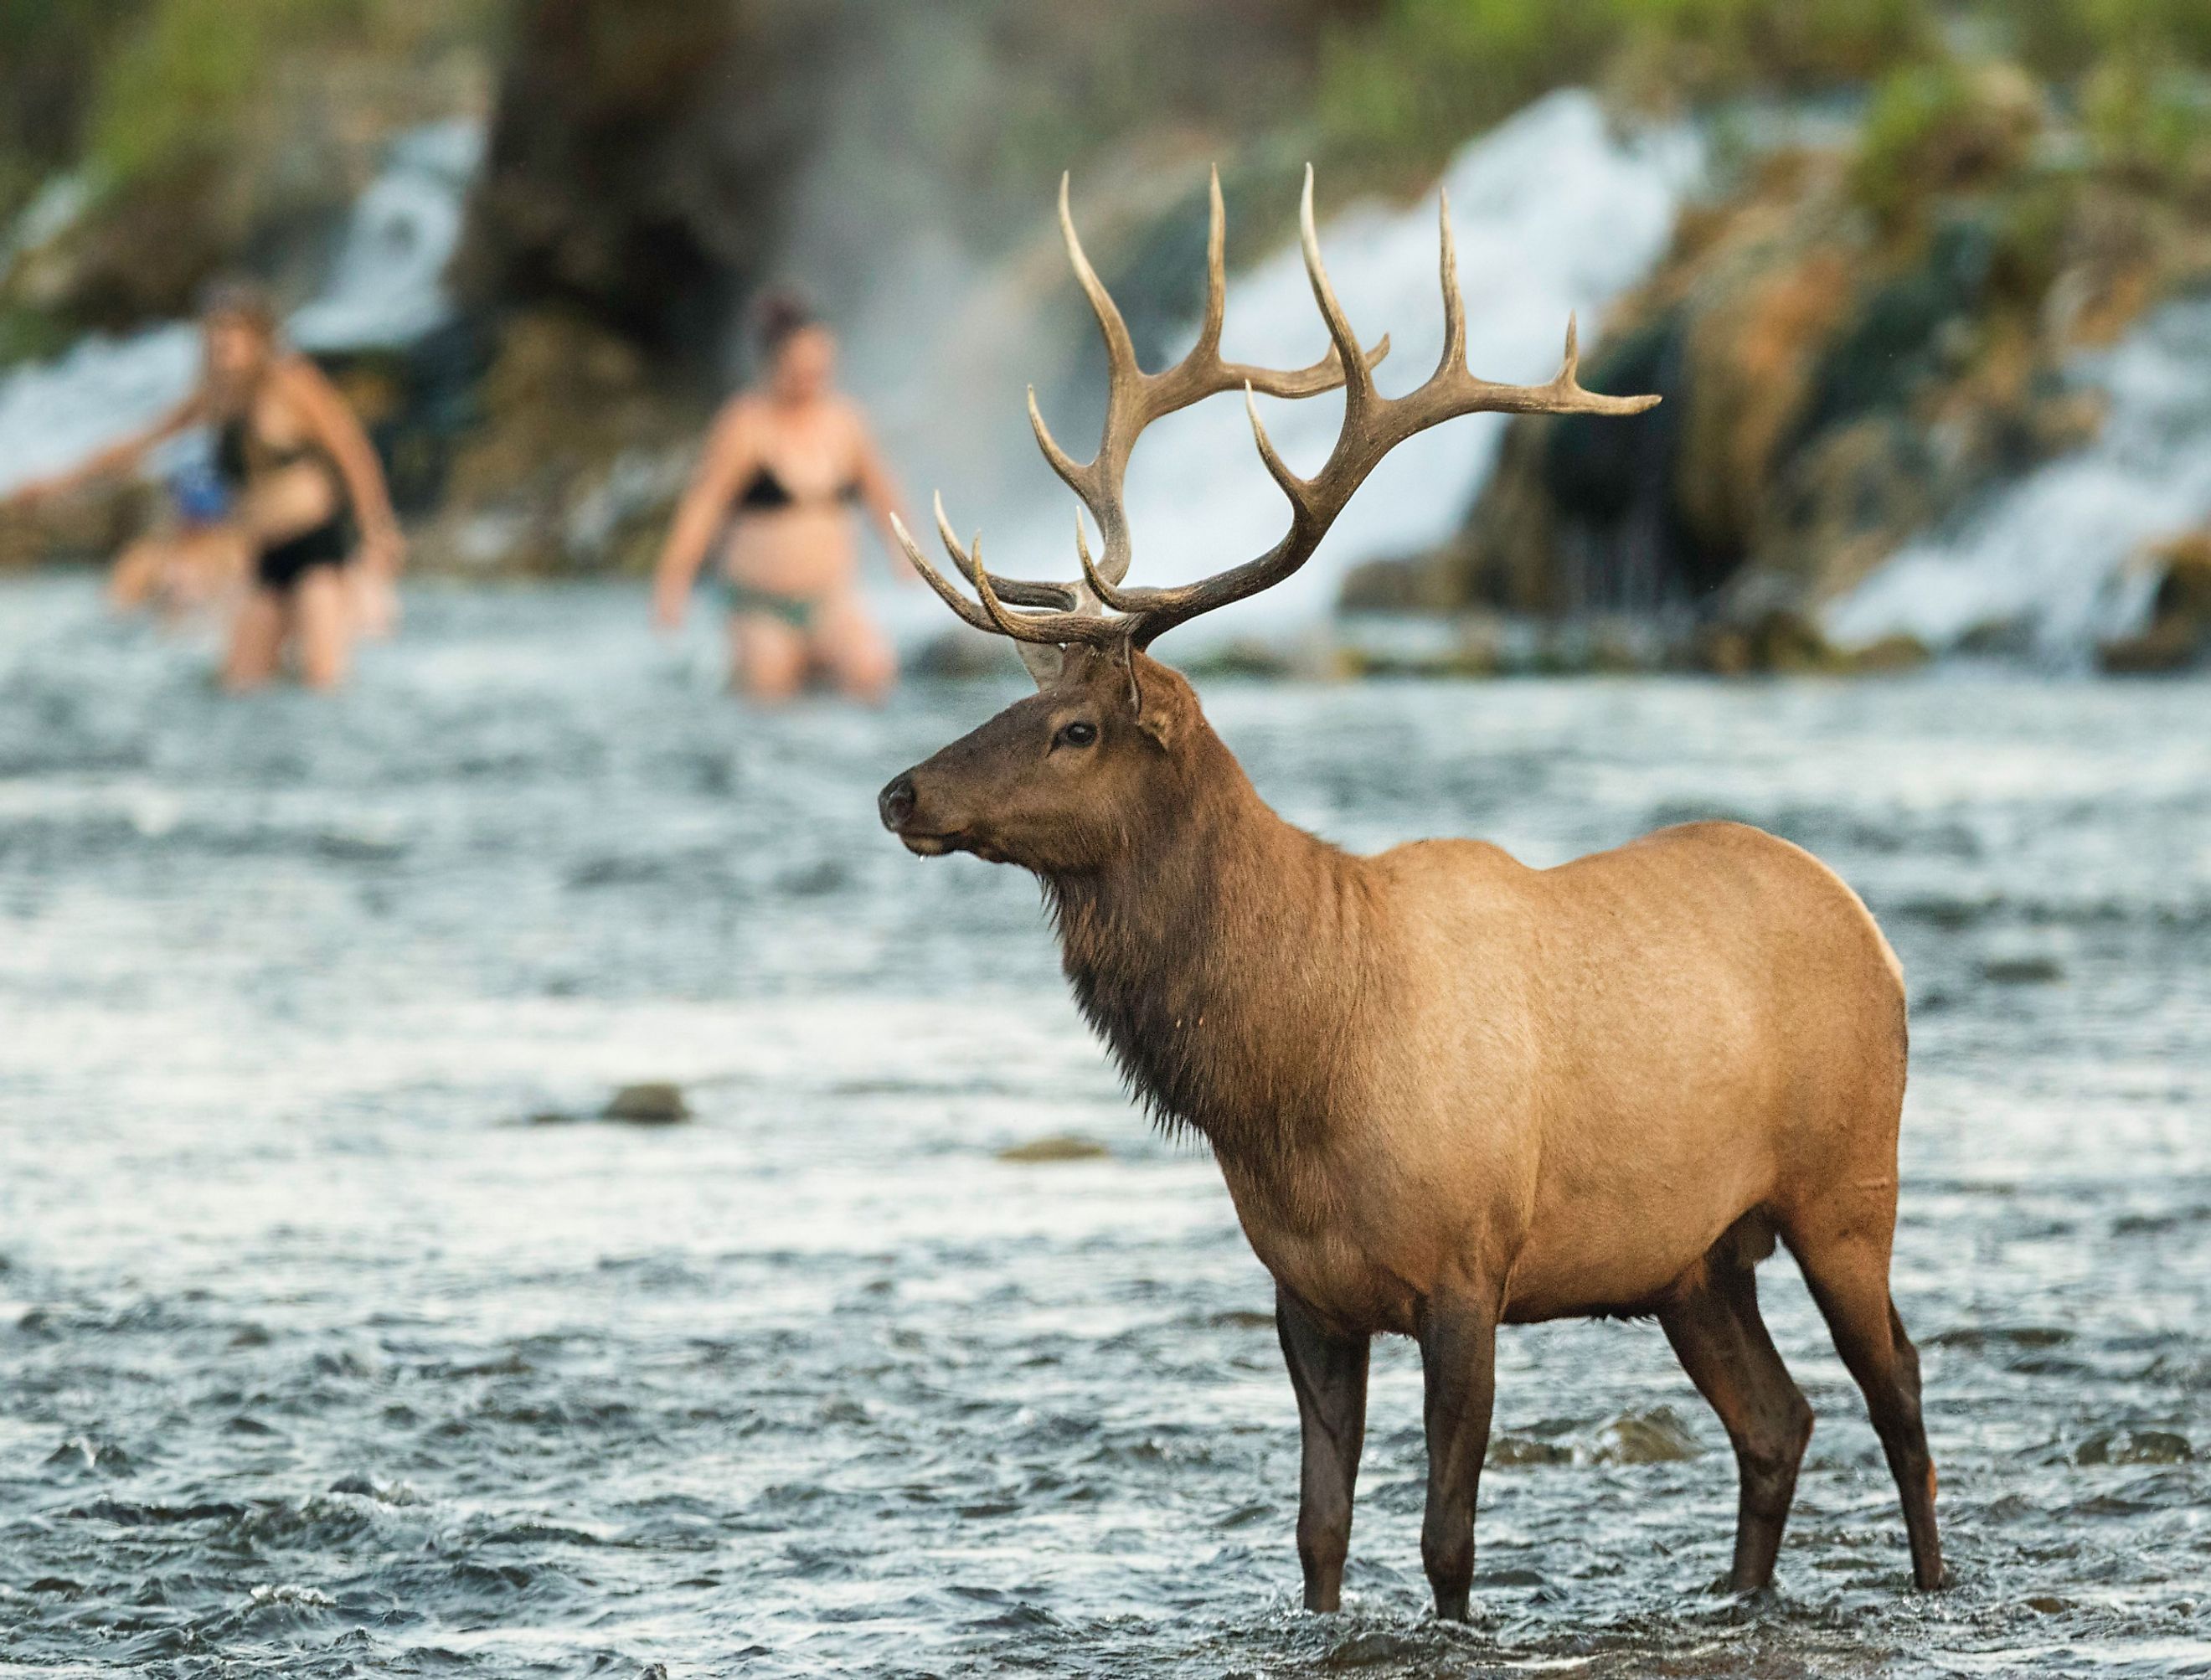 A bull elk stands in the water as tourists enjoy the boiling river in Yellowstone National Park. Image credit Cody Linde via shutterstock